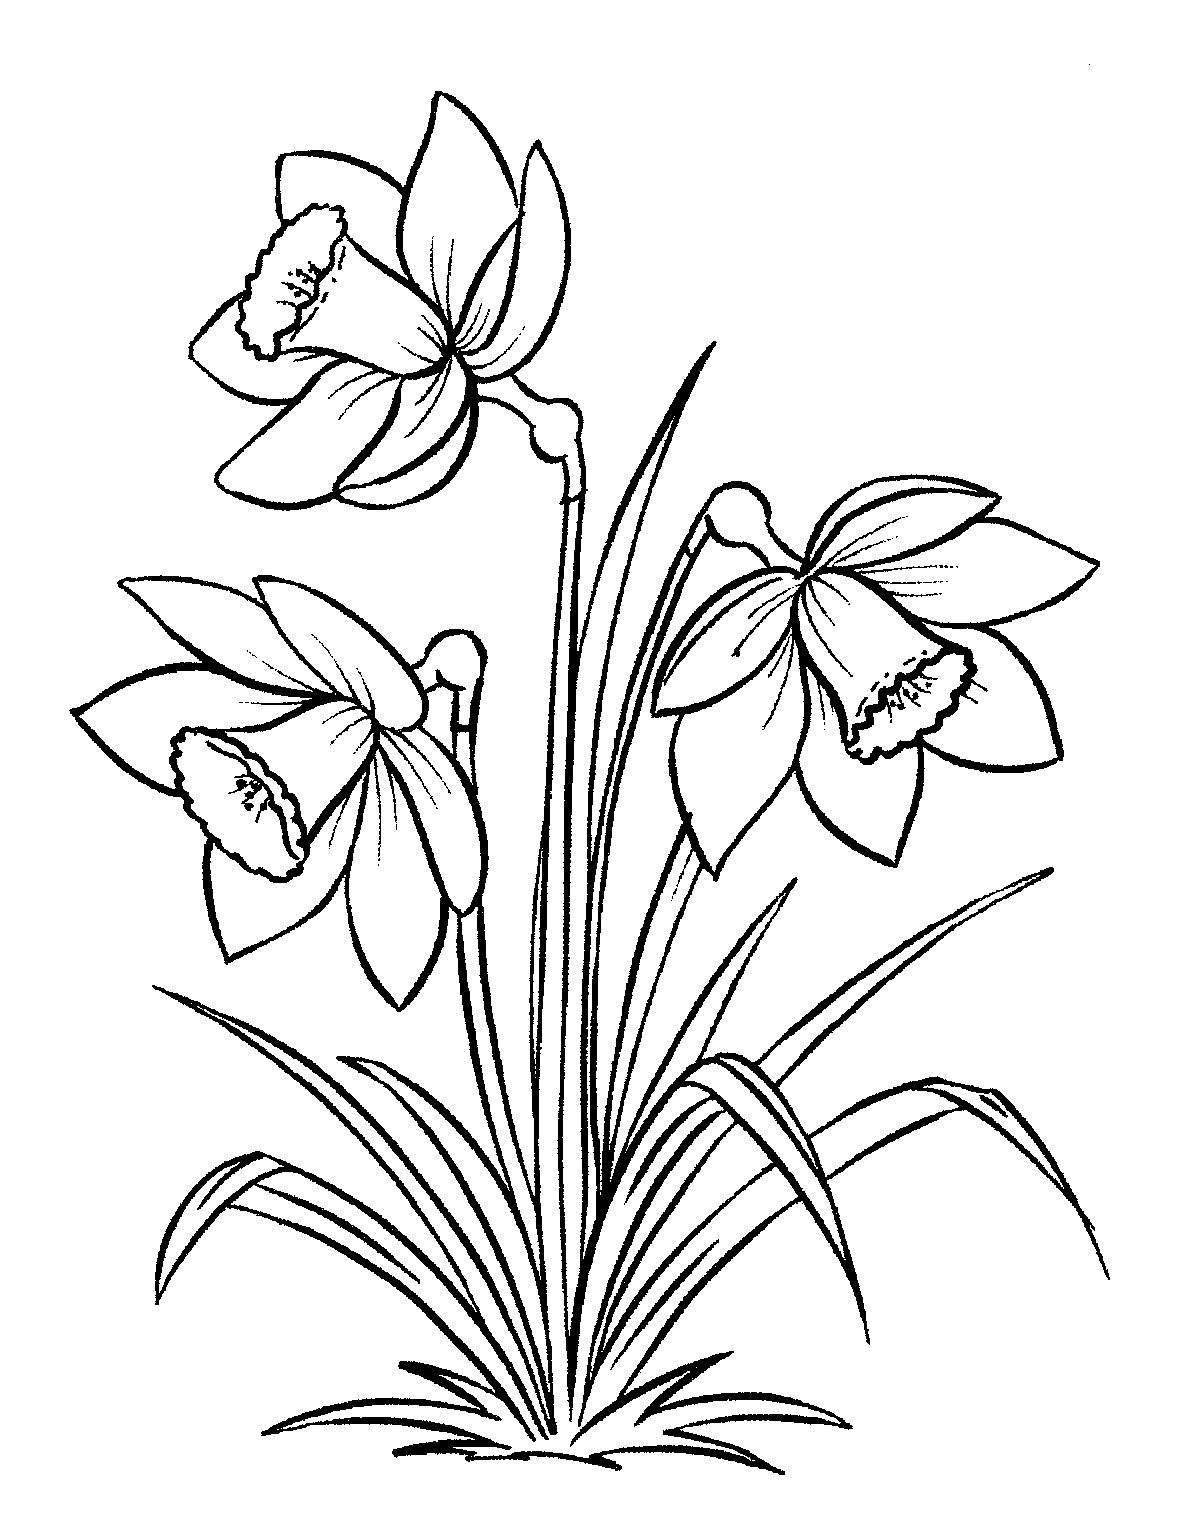 Coloring book charming flower narcissus